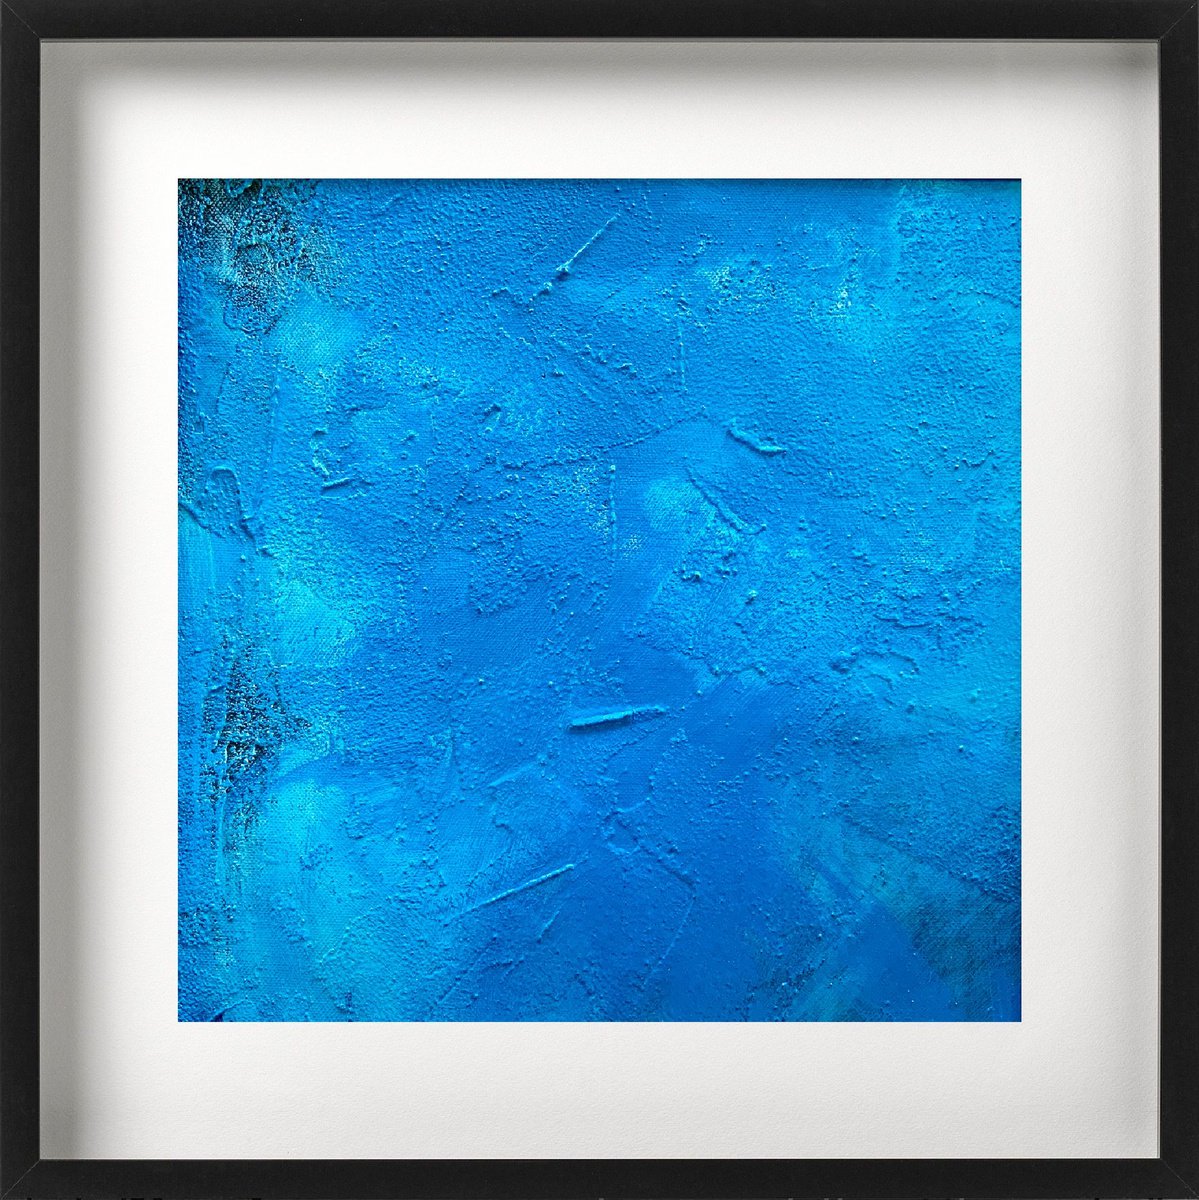 Abstraction No. 2221 -1 blue textured by Anita Kaufmann